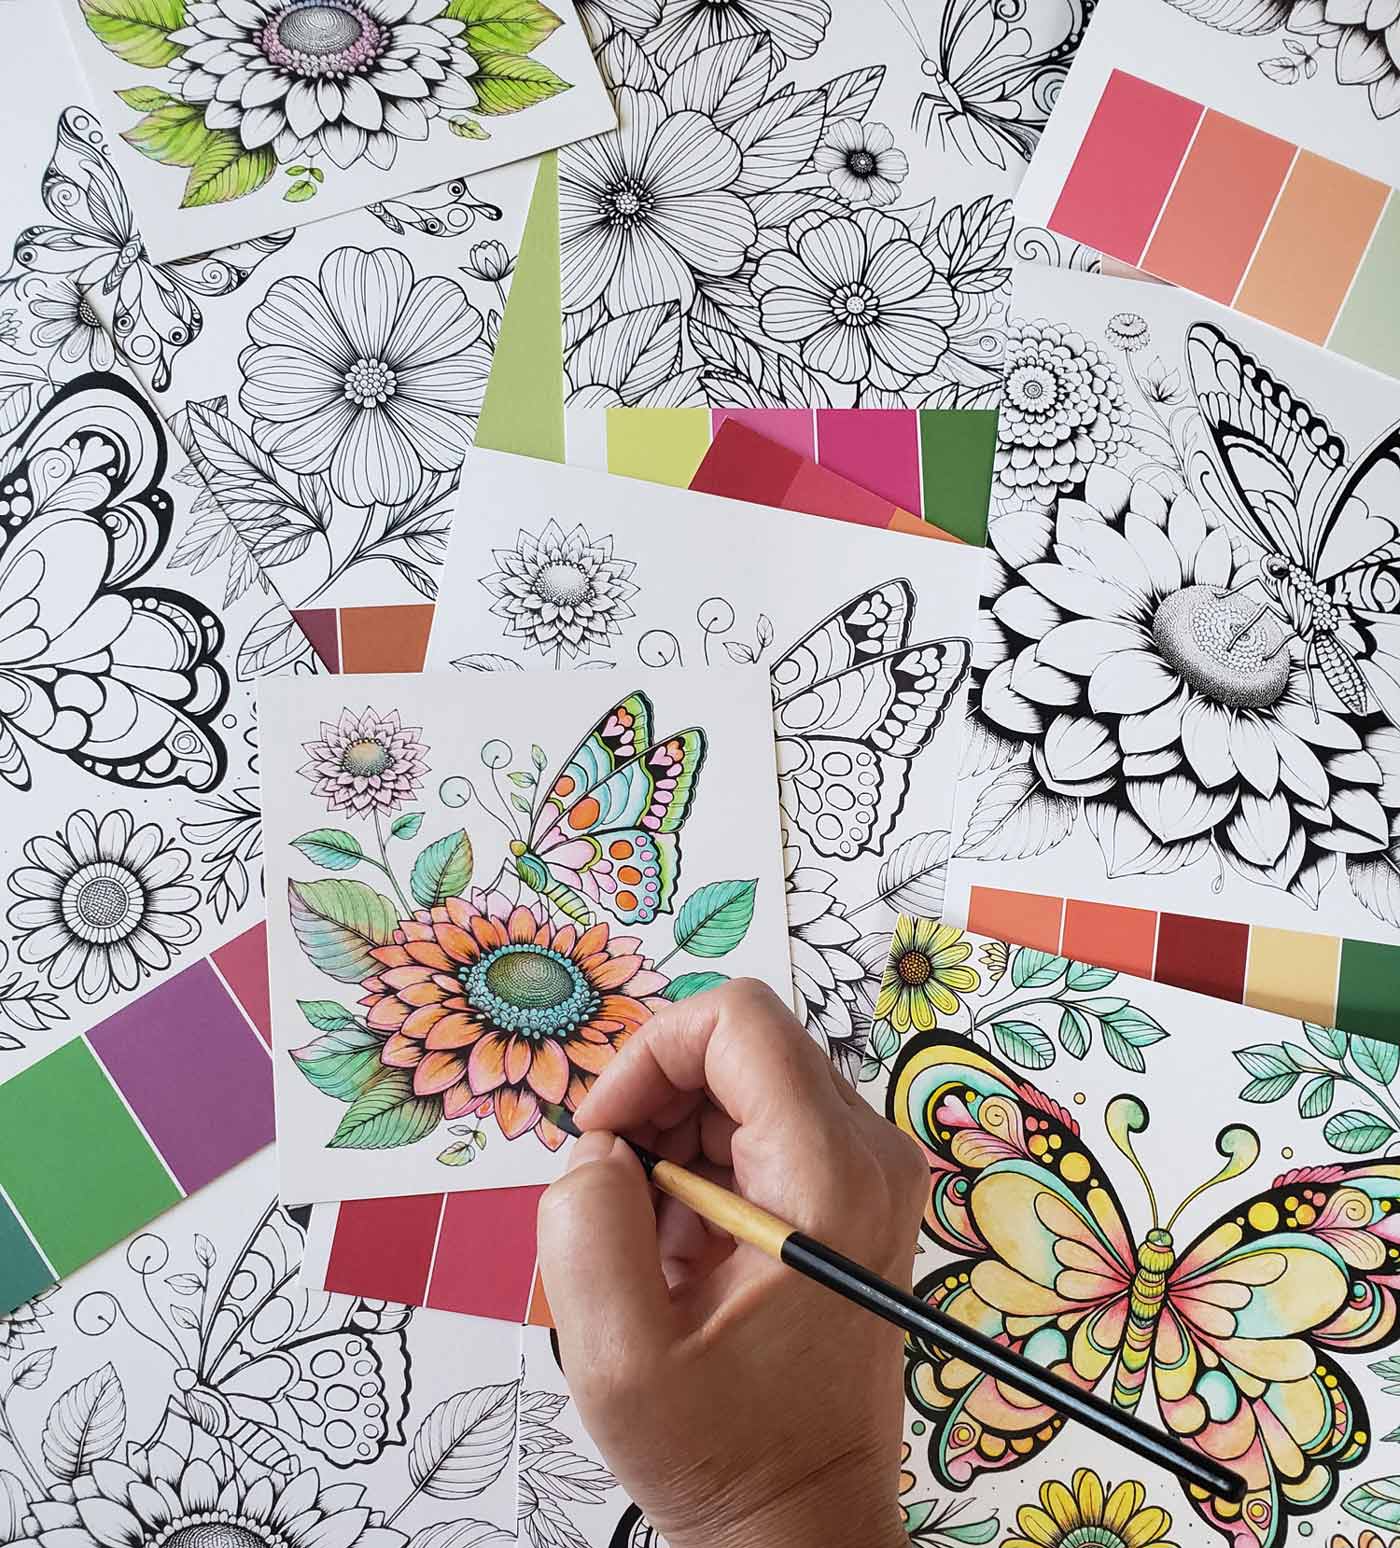 Butterfly coloring pages for adult coloring features a color matching system. These color cards are great for watercolor, magic markers, gel pens and colored pencils.